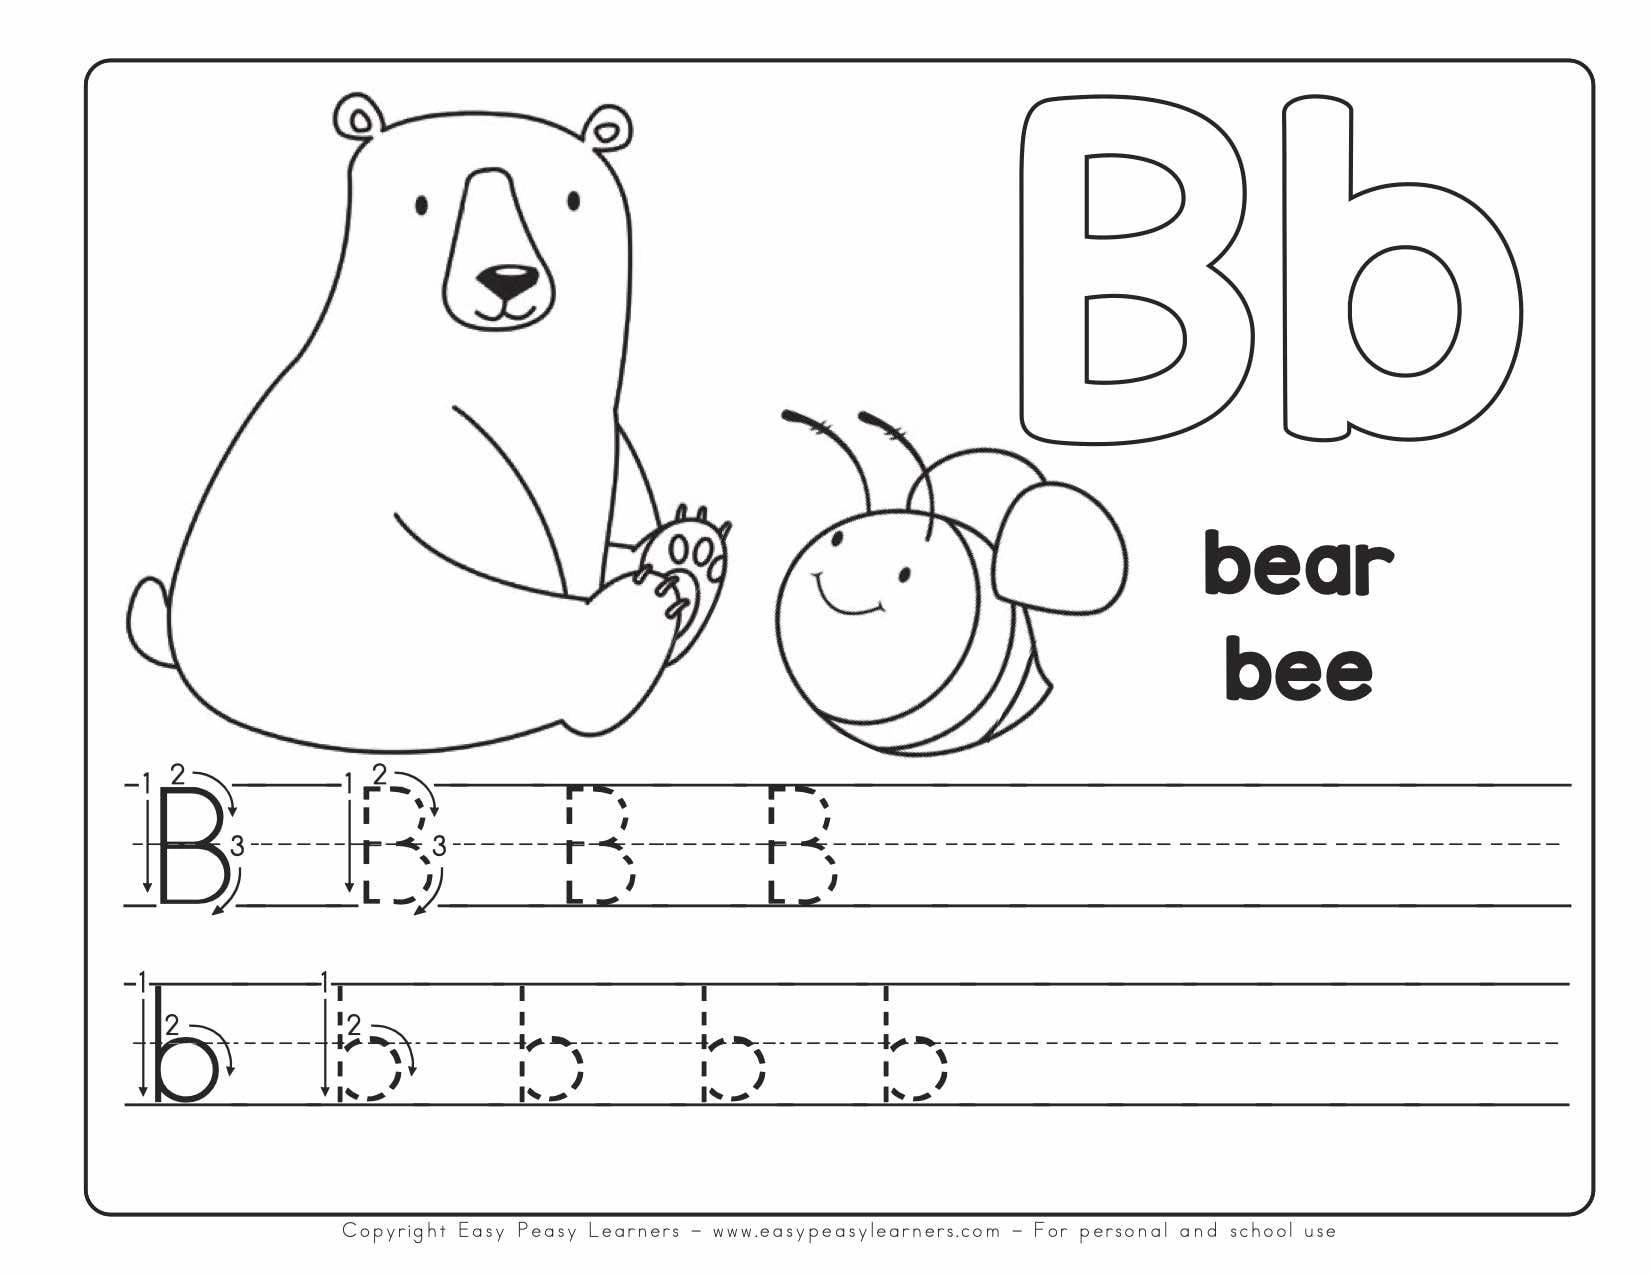 free-printable-alphabet-book-alphabet-worksheets-for-pre-k-and-k-easy-peasy-learners-free